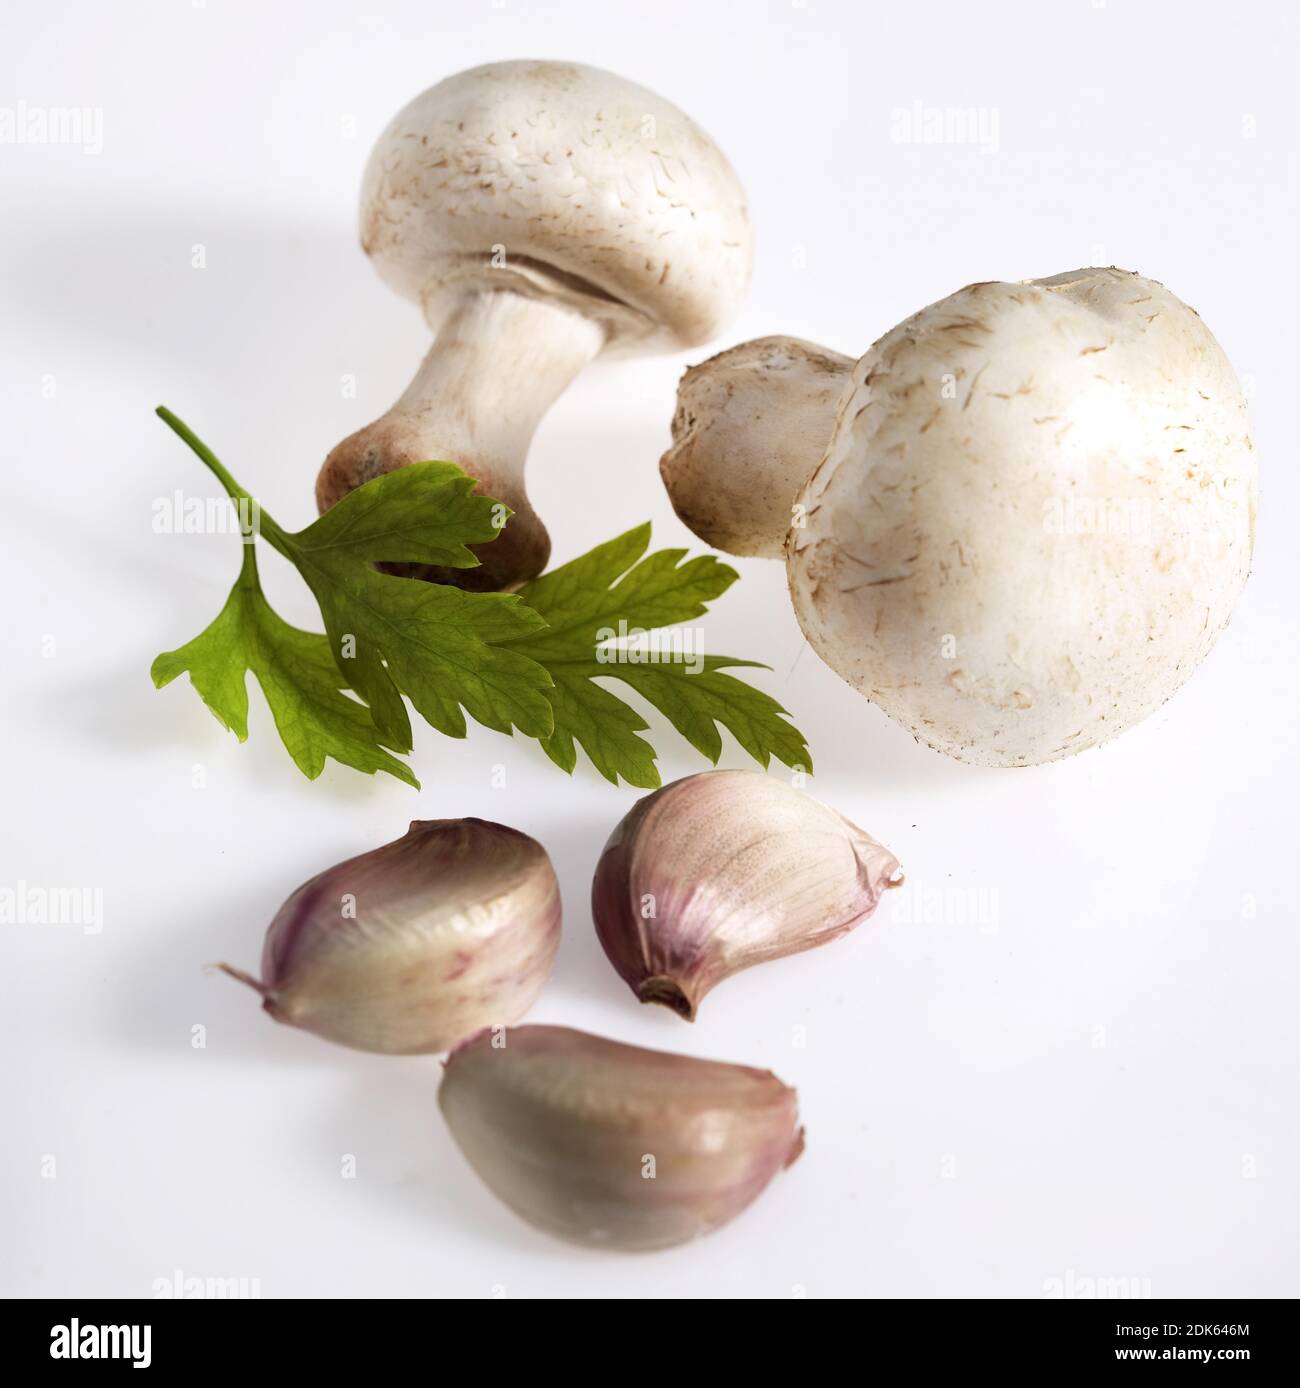 Button Mushroom or Cultivated Mushroom, agaricus bisporus with Parsley and Garlic Stock Photo